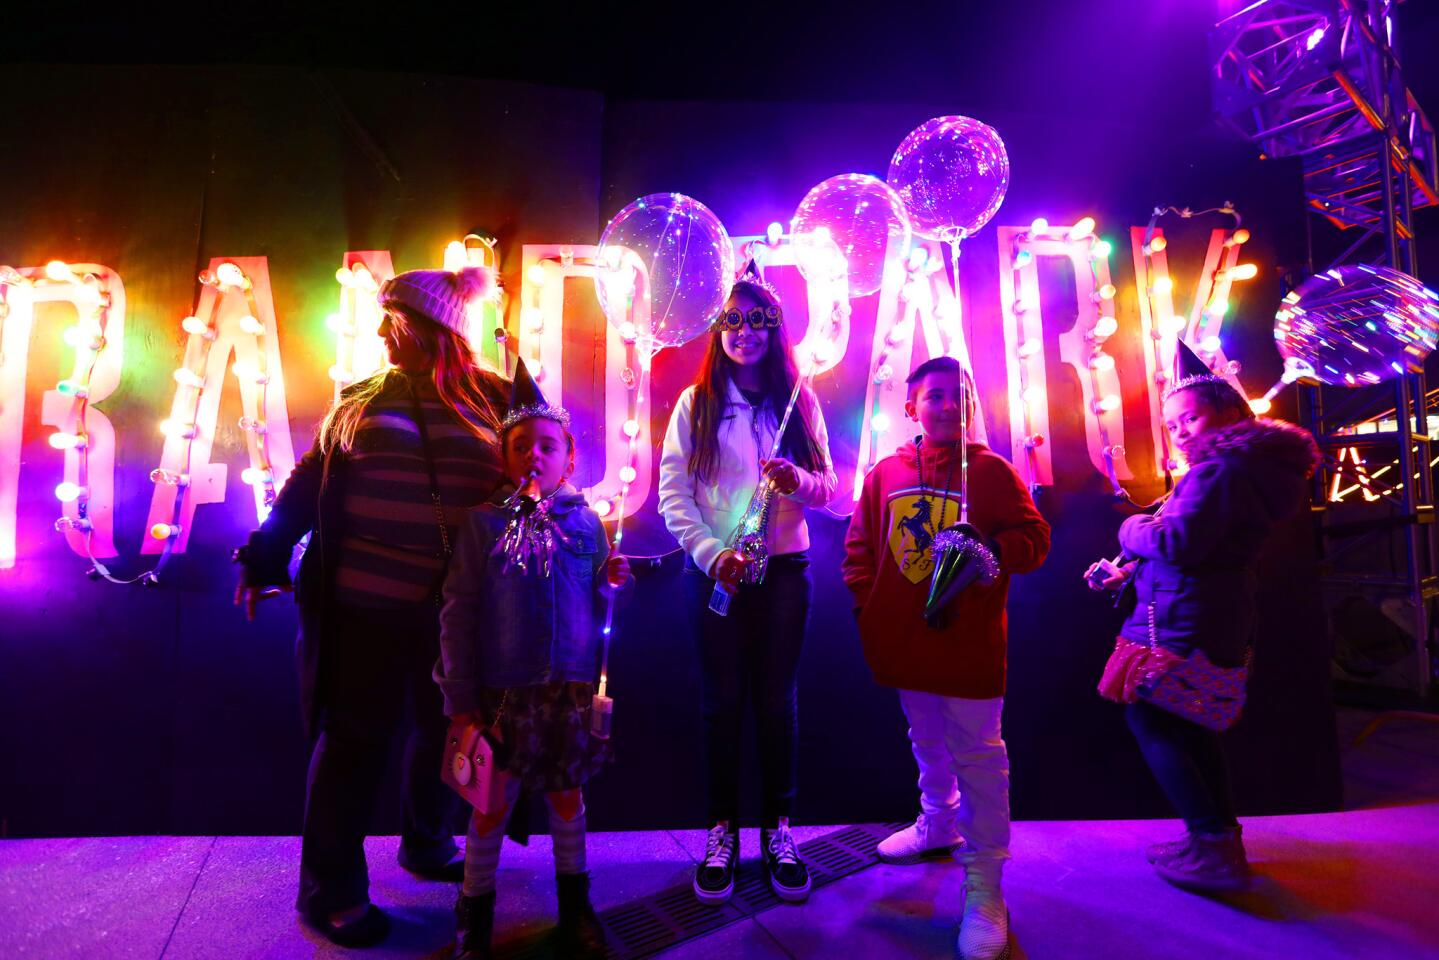 The Gonzalezes and a friend, right, get festive at the New Year's Eve event at L.A.'s Grand Park.